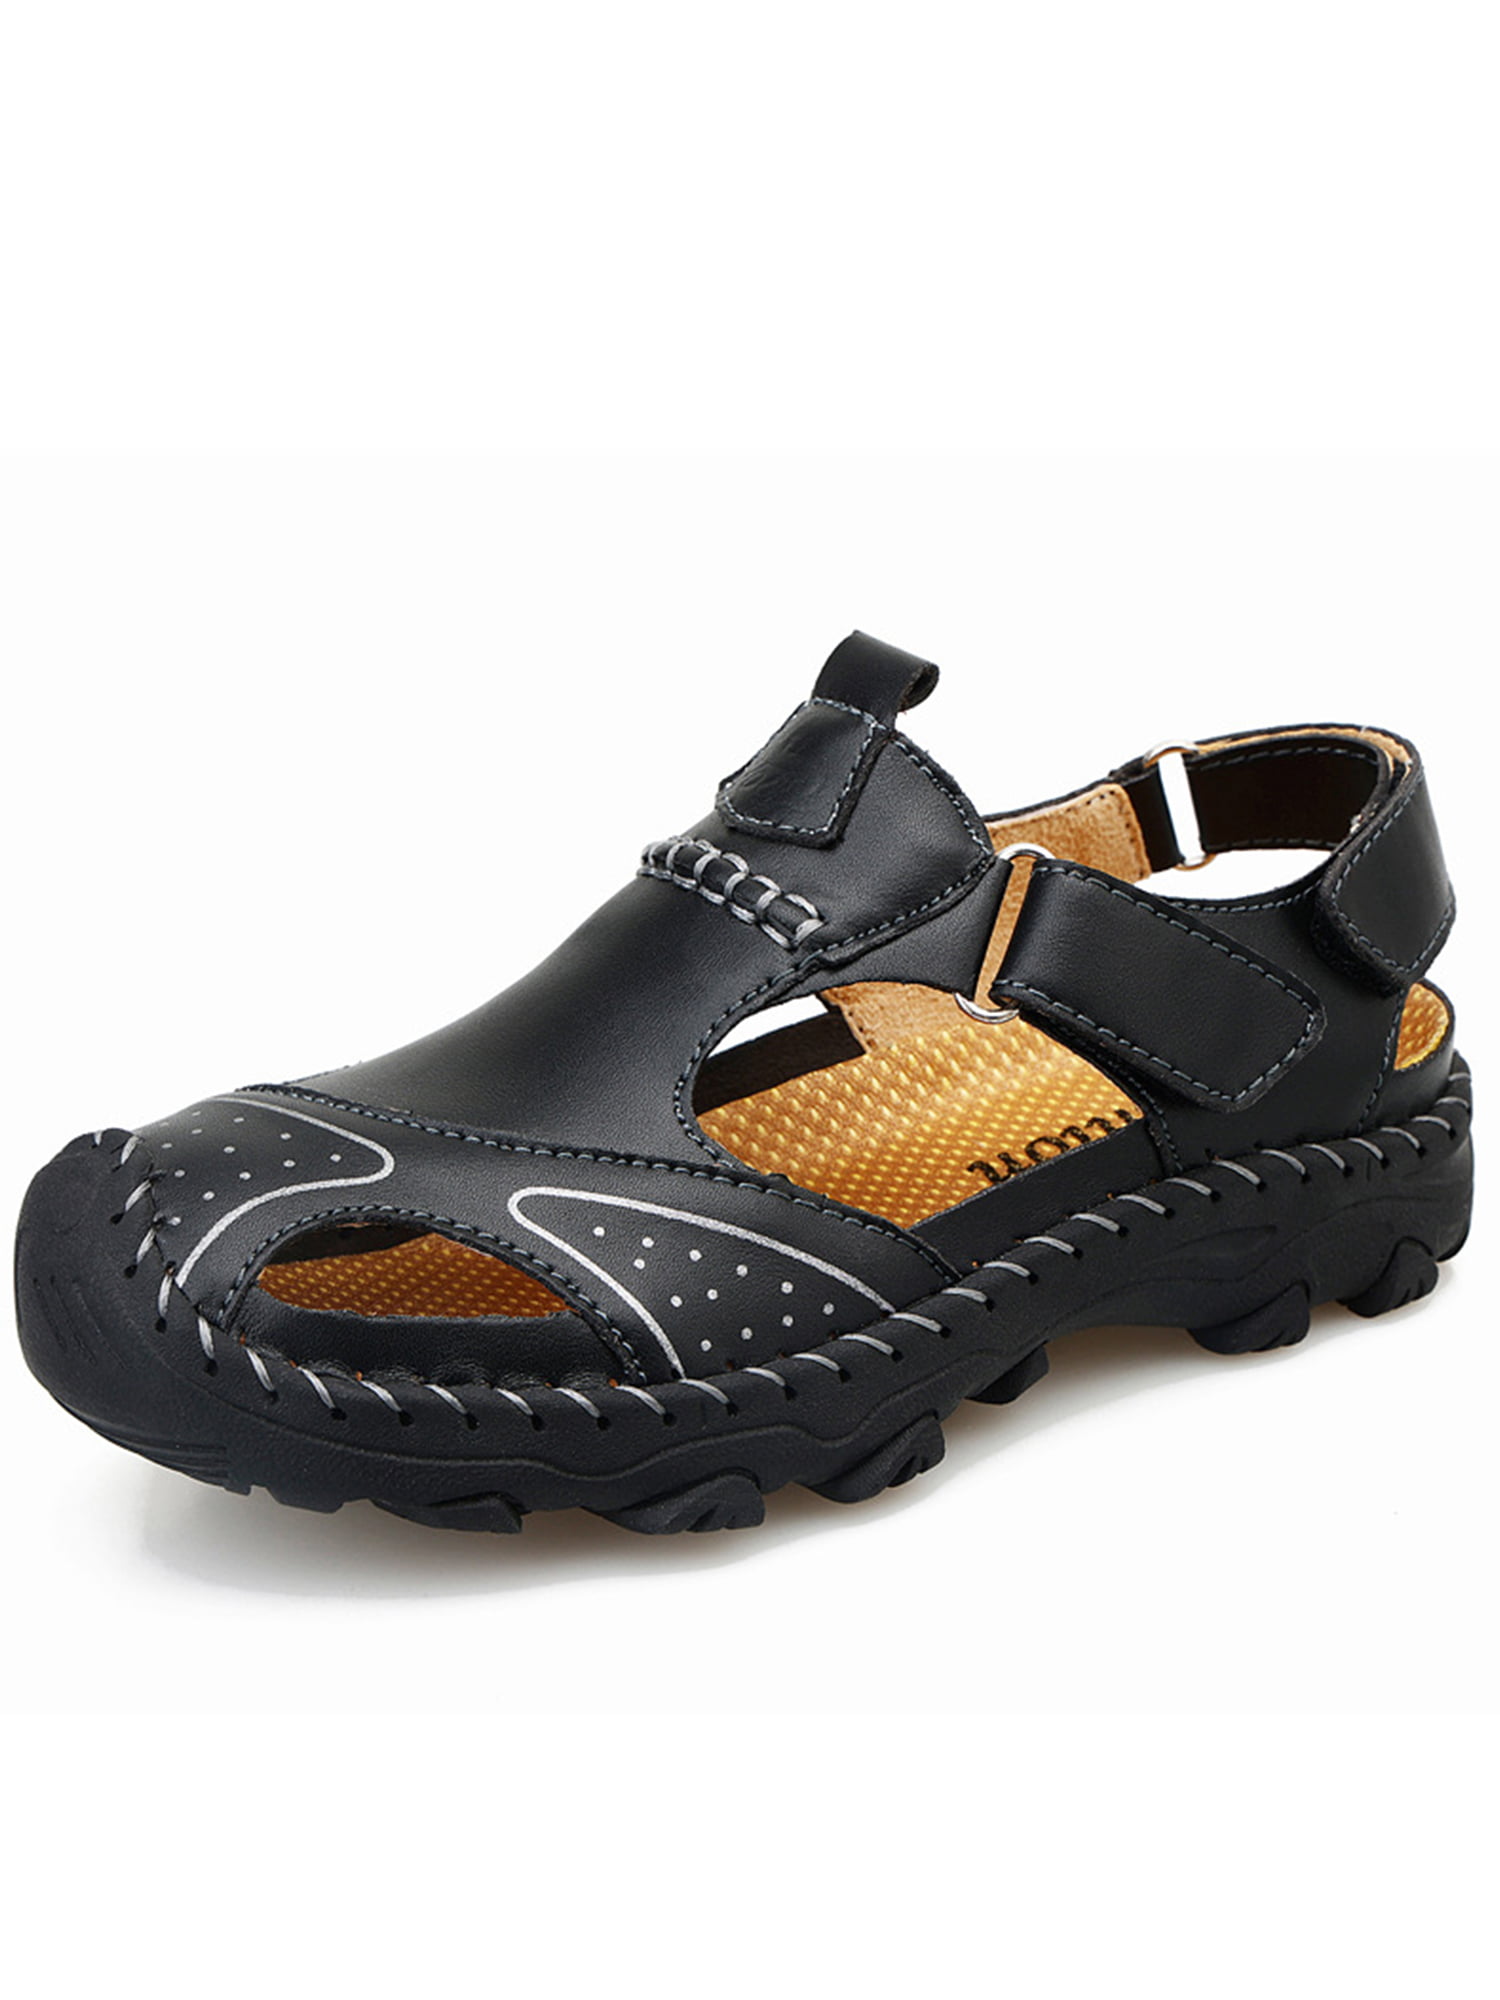 Details about   Kid's Boys Hiking Leather Sandals Leisure Closed Toe Fisherman Beach Shoes 